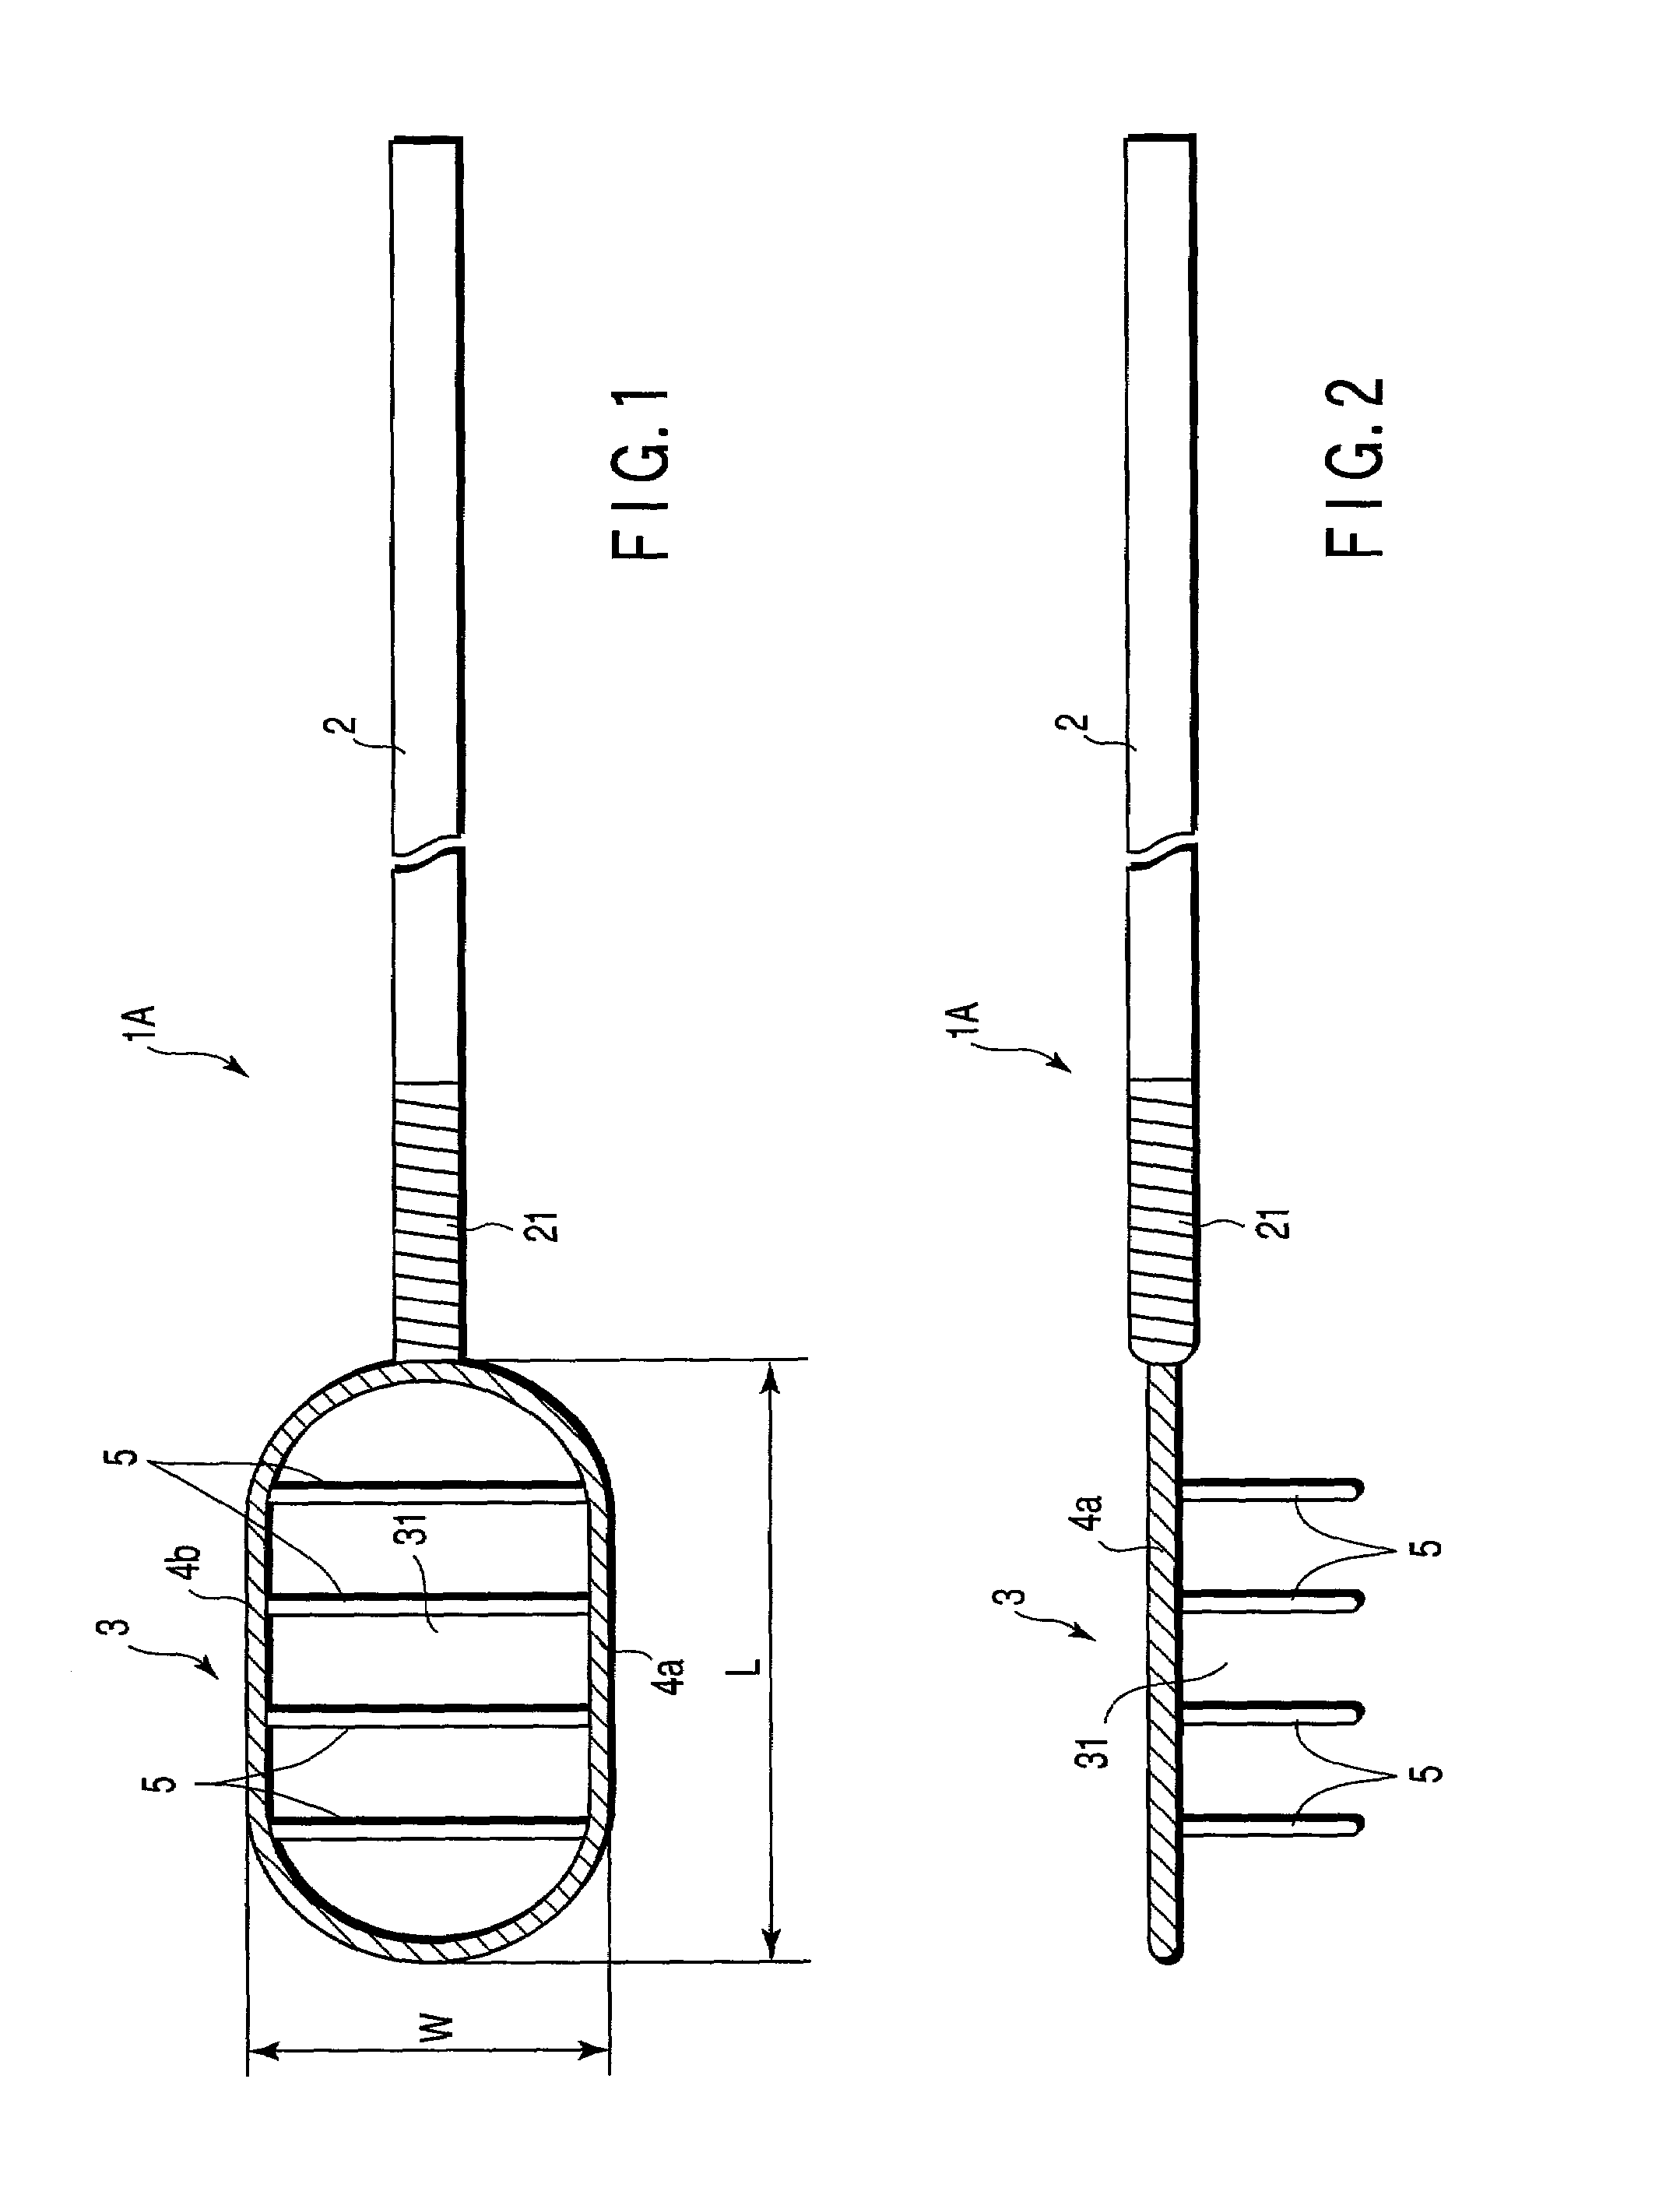 Intravascular obstruction removing wire and medical instrument